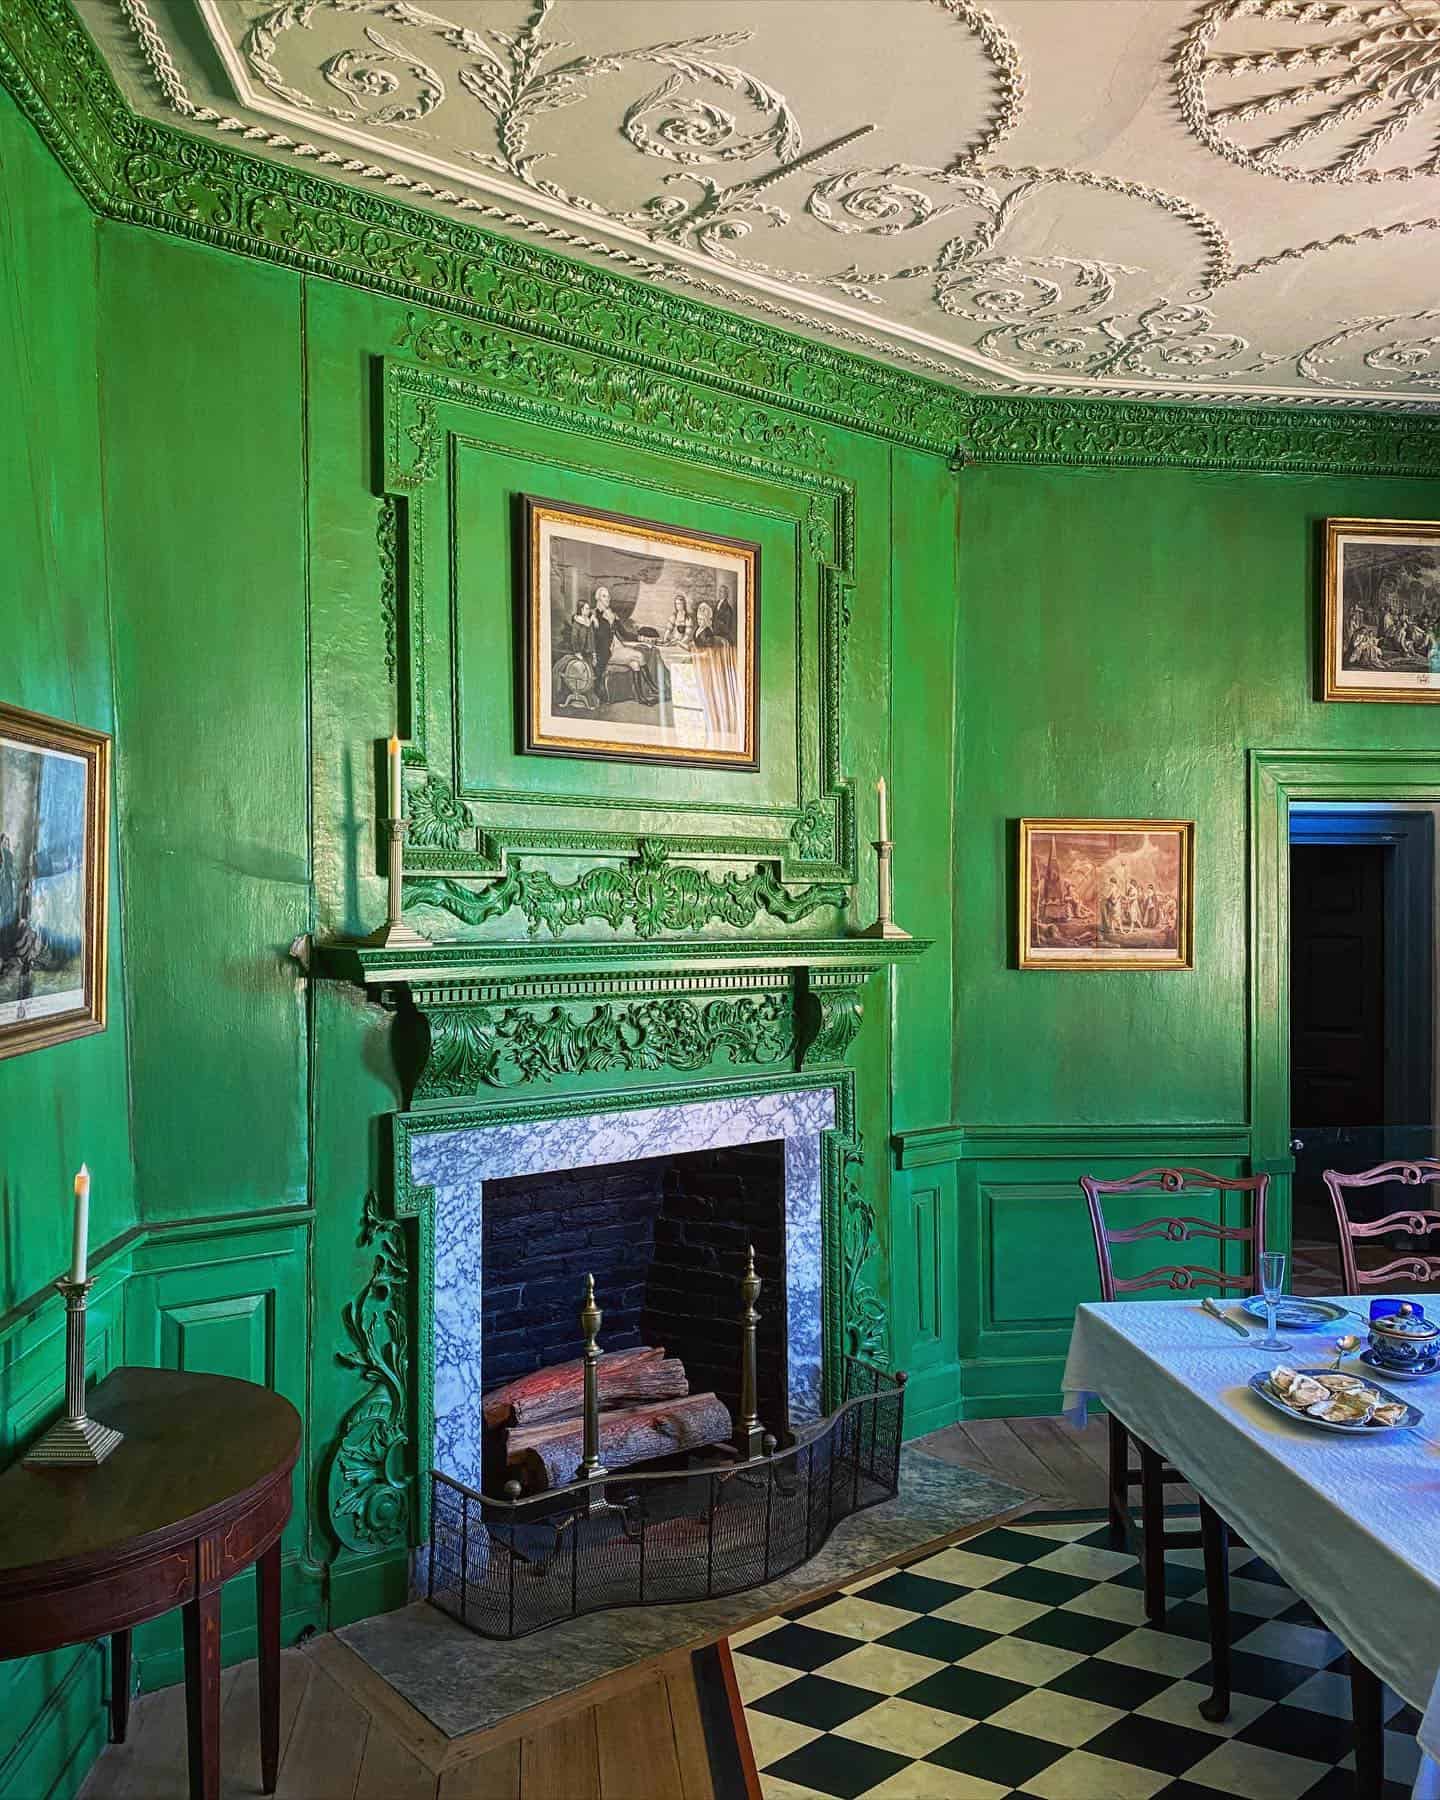 Extremely Romantic And Historic Interior Decoration by James Coviello